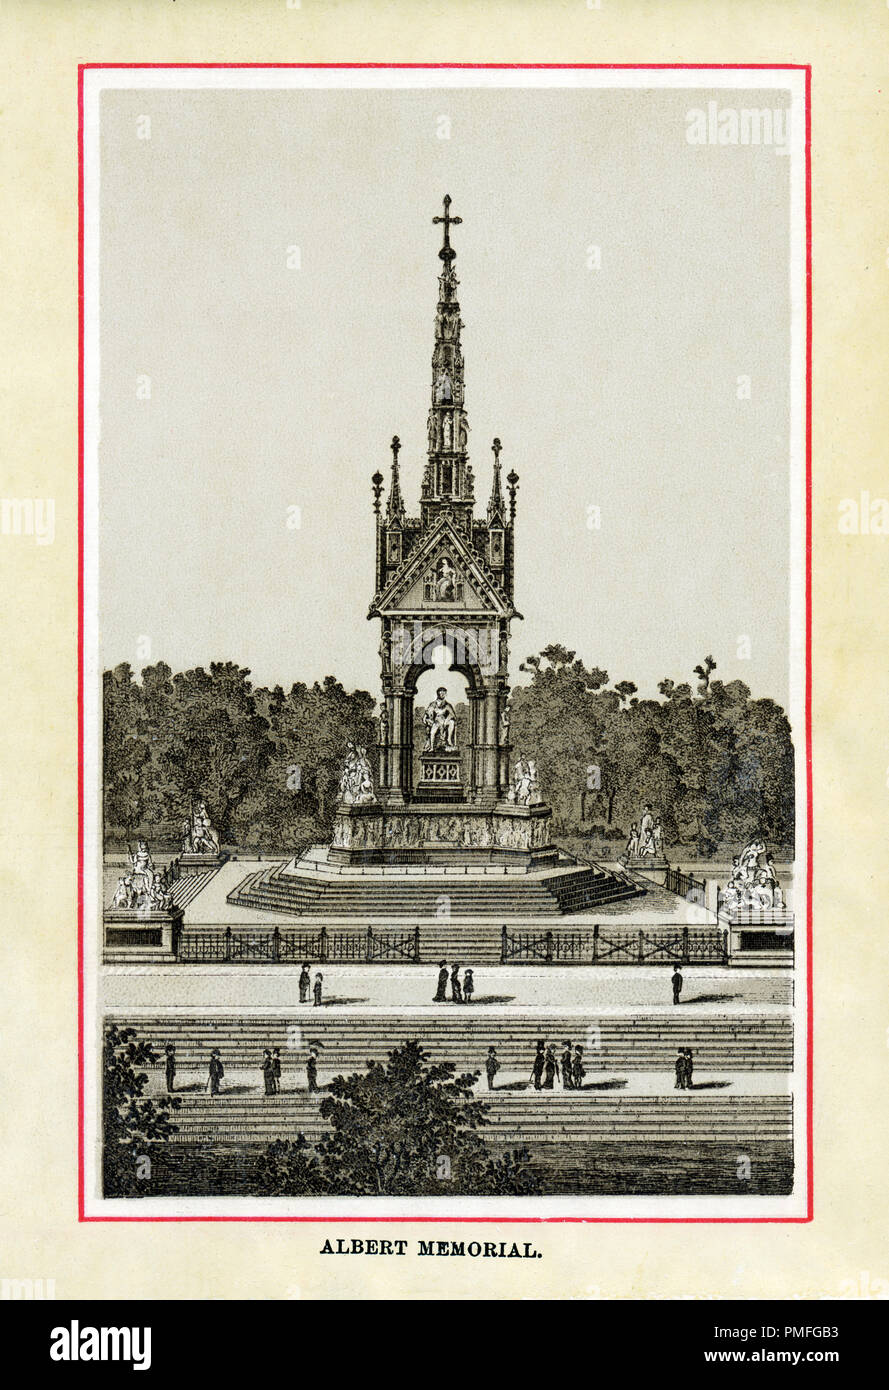 The Albert Memorial, 1883 high quality steel engraving of the statue in Kensington Gardens completed in 1872 commissioned by Queen Victoria in memory of her consort who died in 1861, designed by Sir George Gilbert Scott Stock Photo